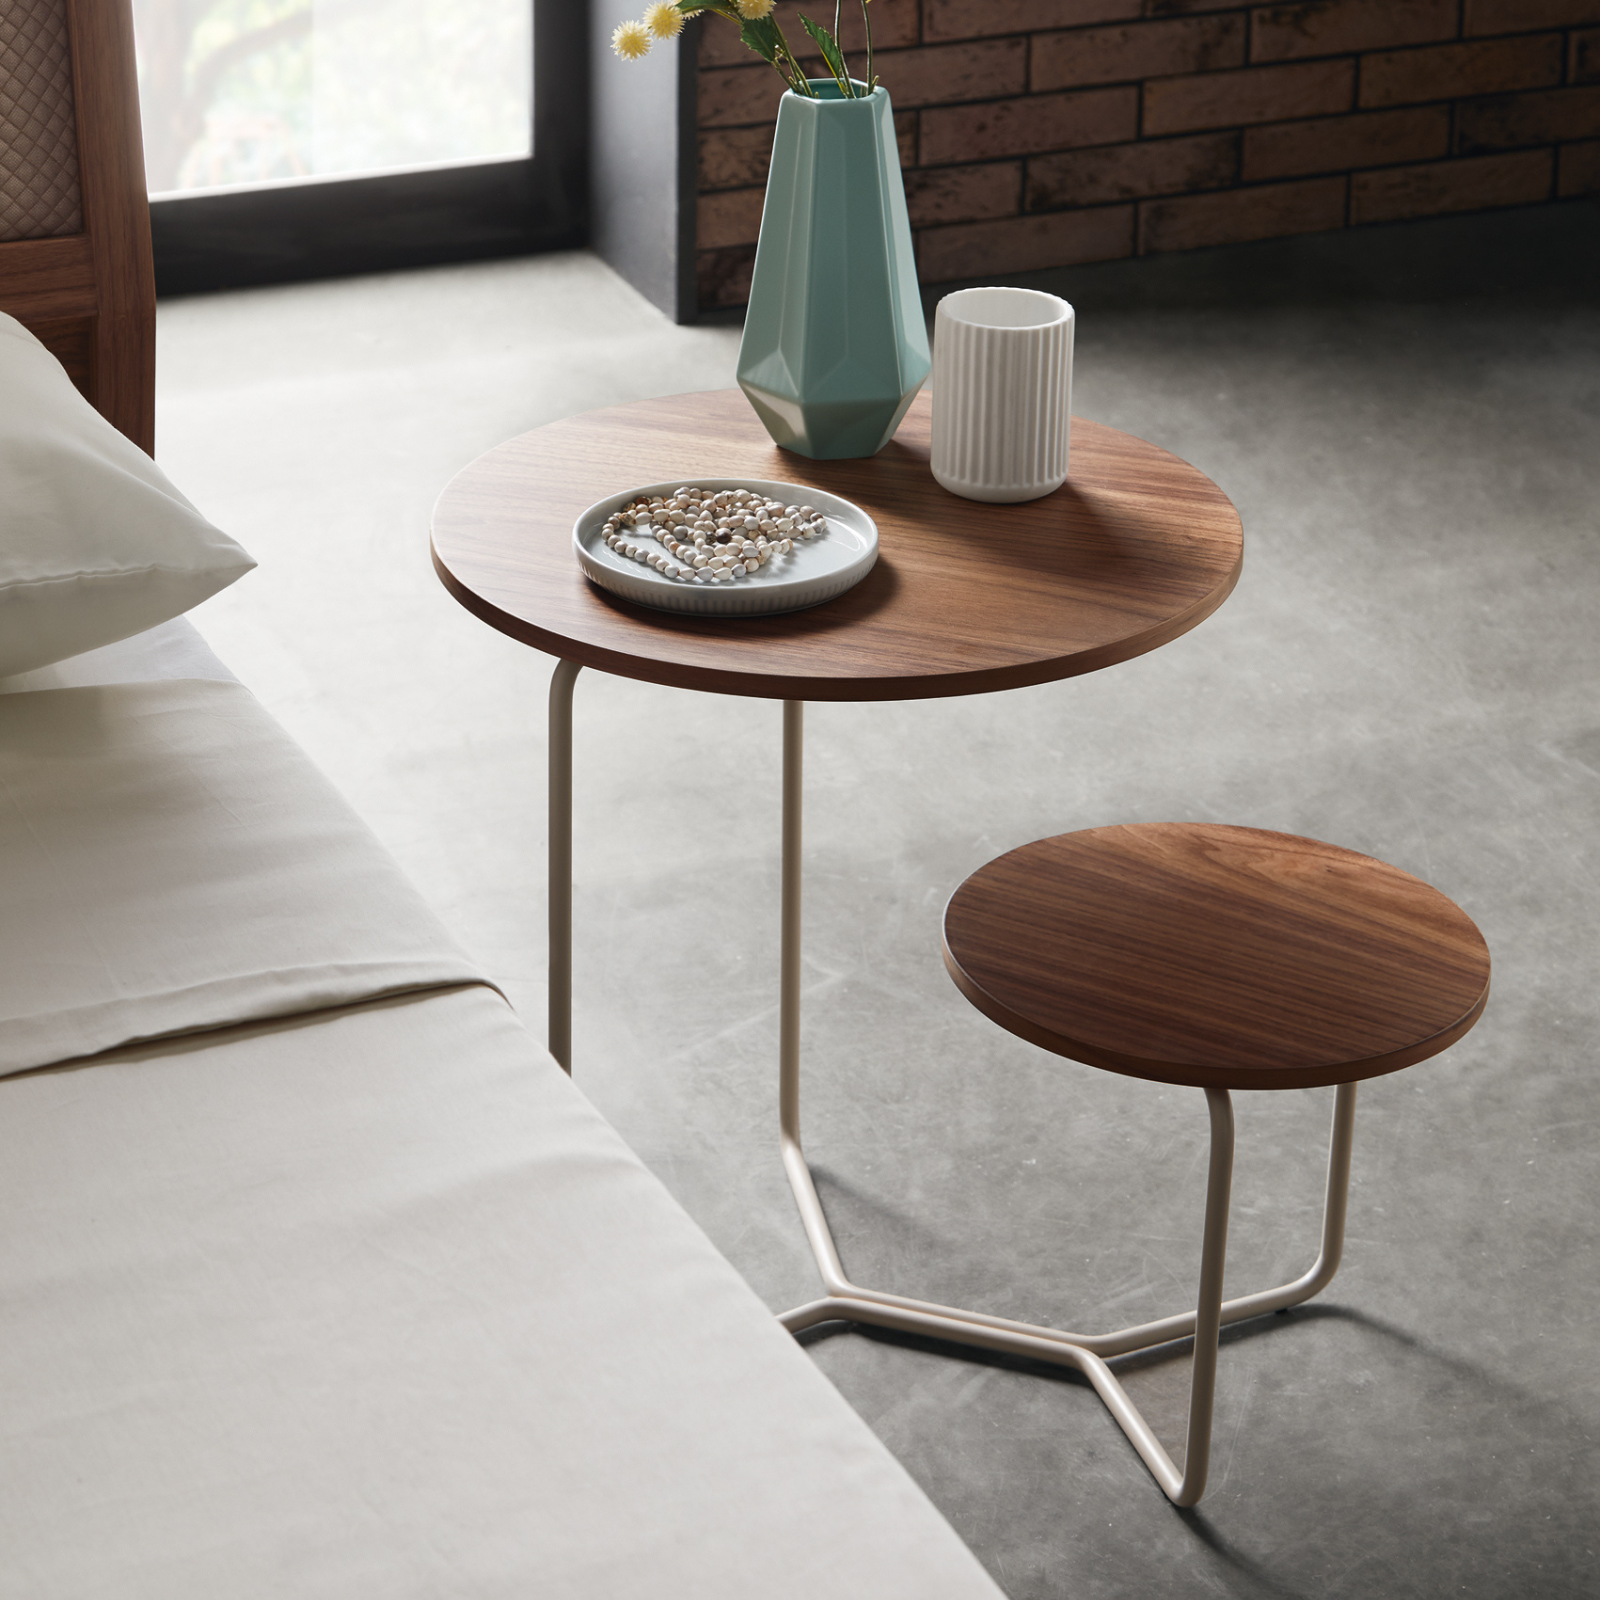 MOBENIA Loft Side Table Tokyp Top and White Legs